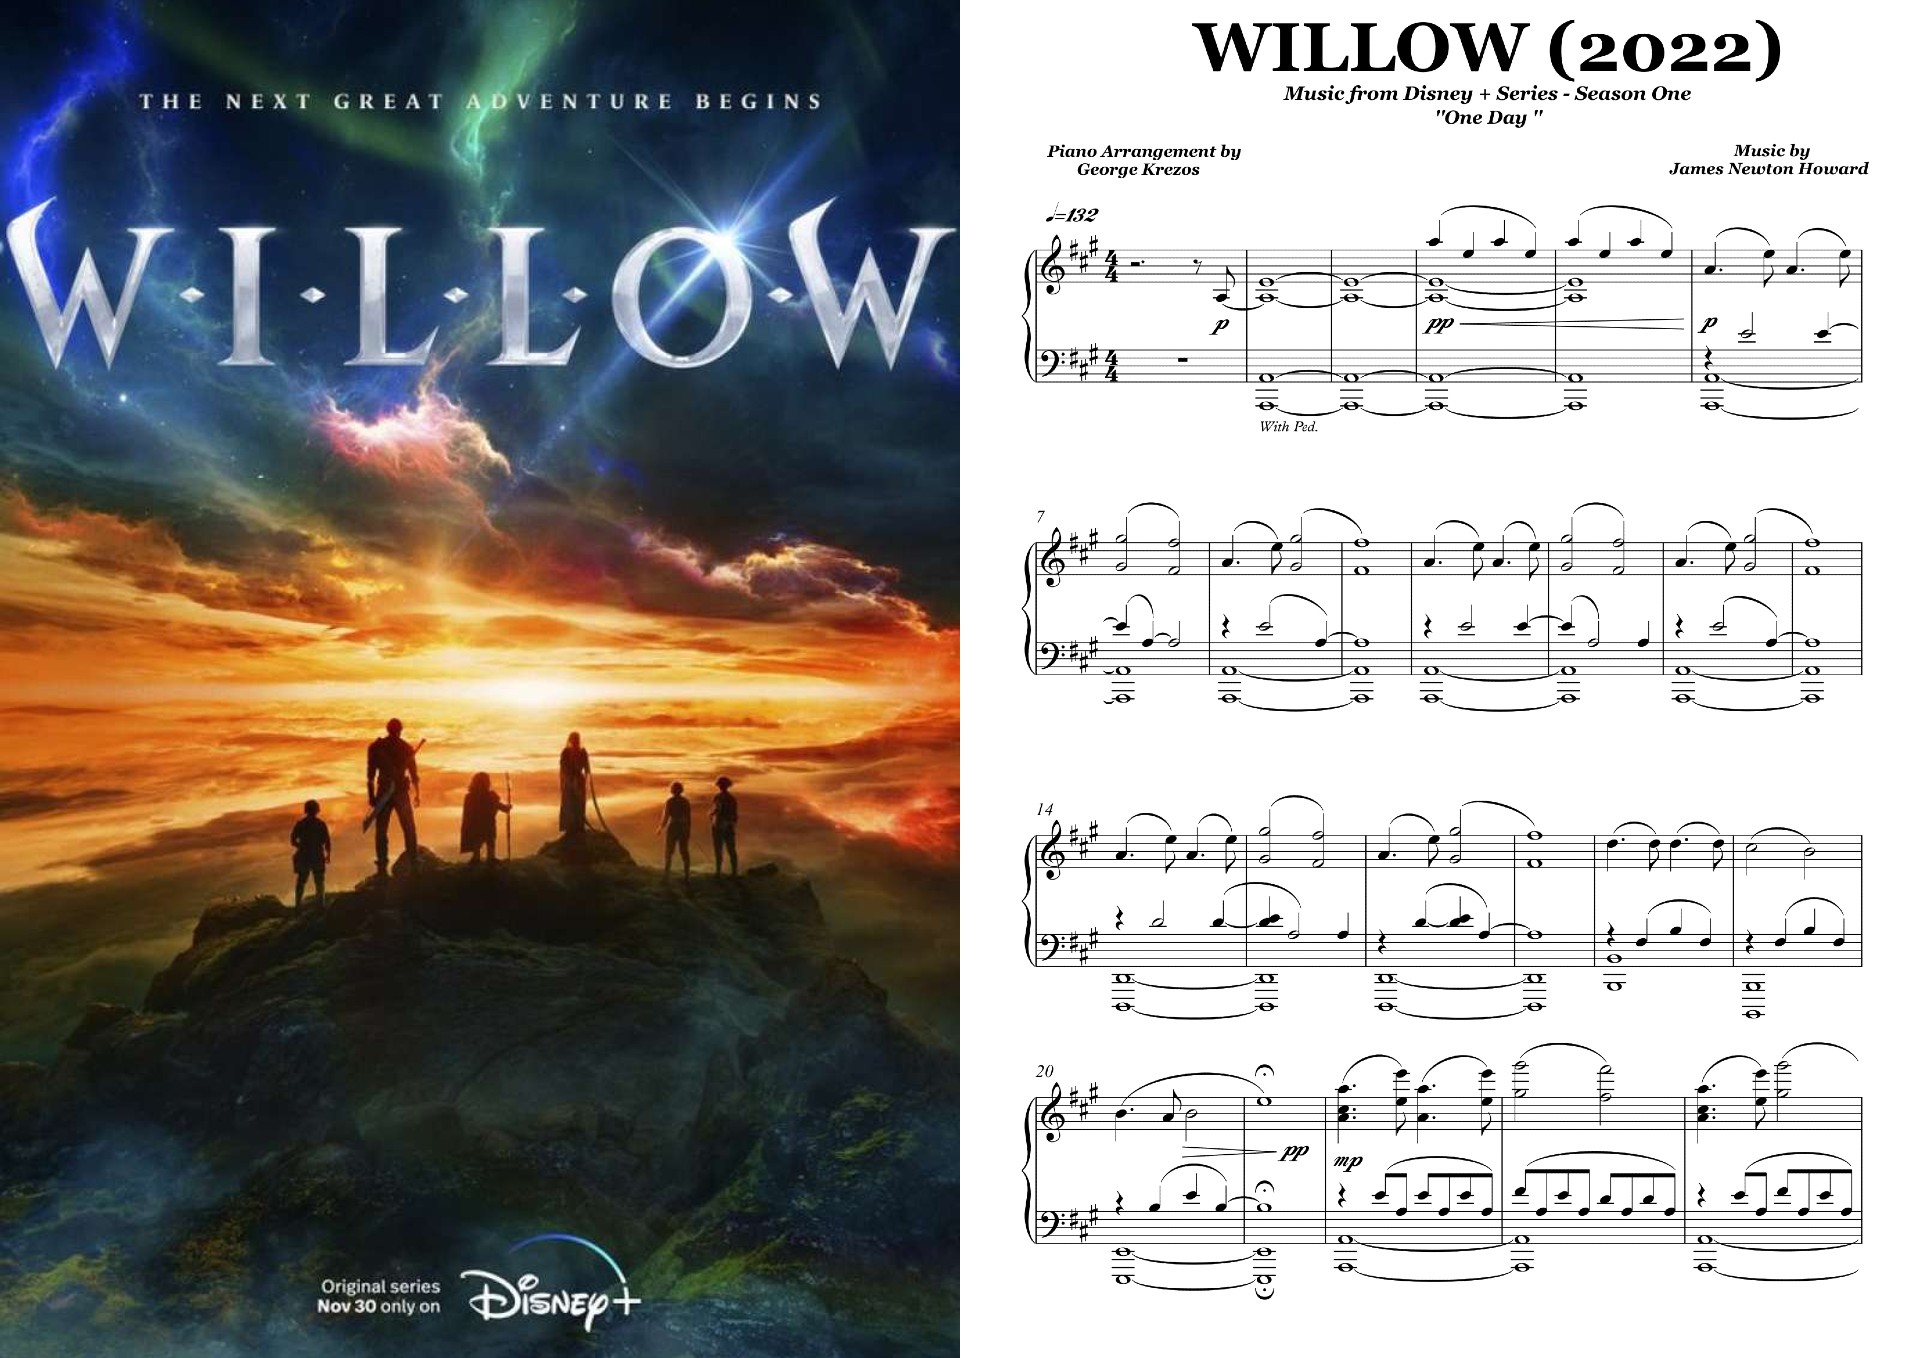 WILLOW - One Day.jpg